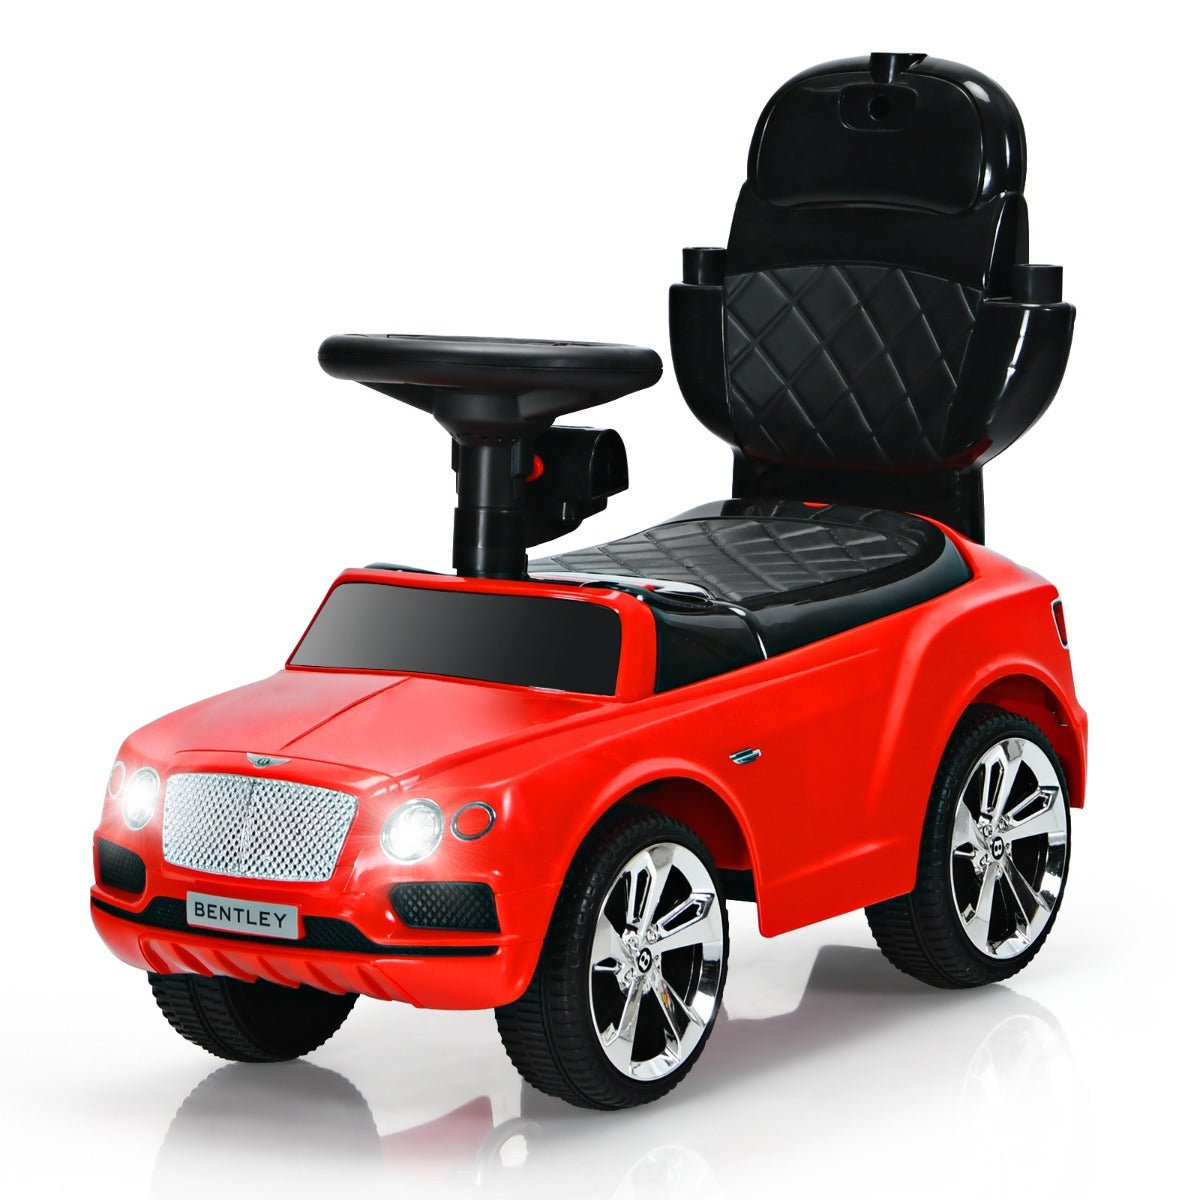 Kids Bentley Push Car: Canopy, Red Ride On